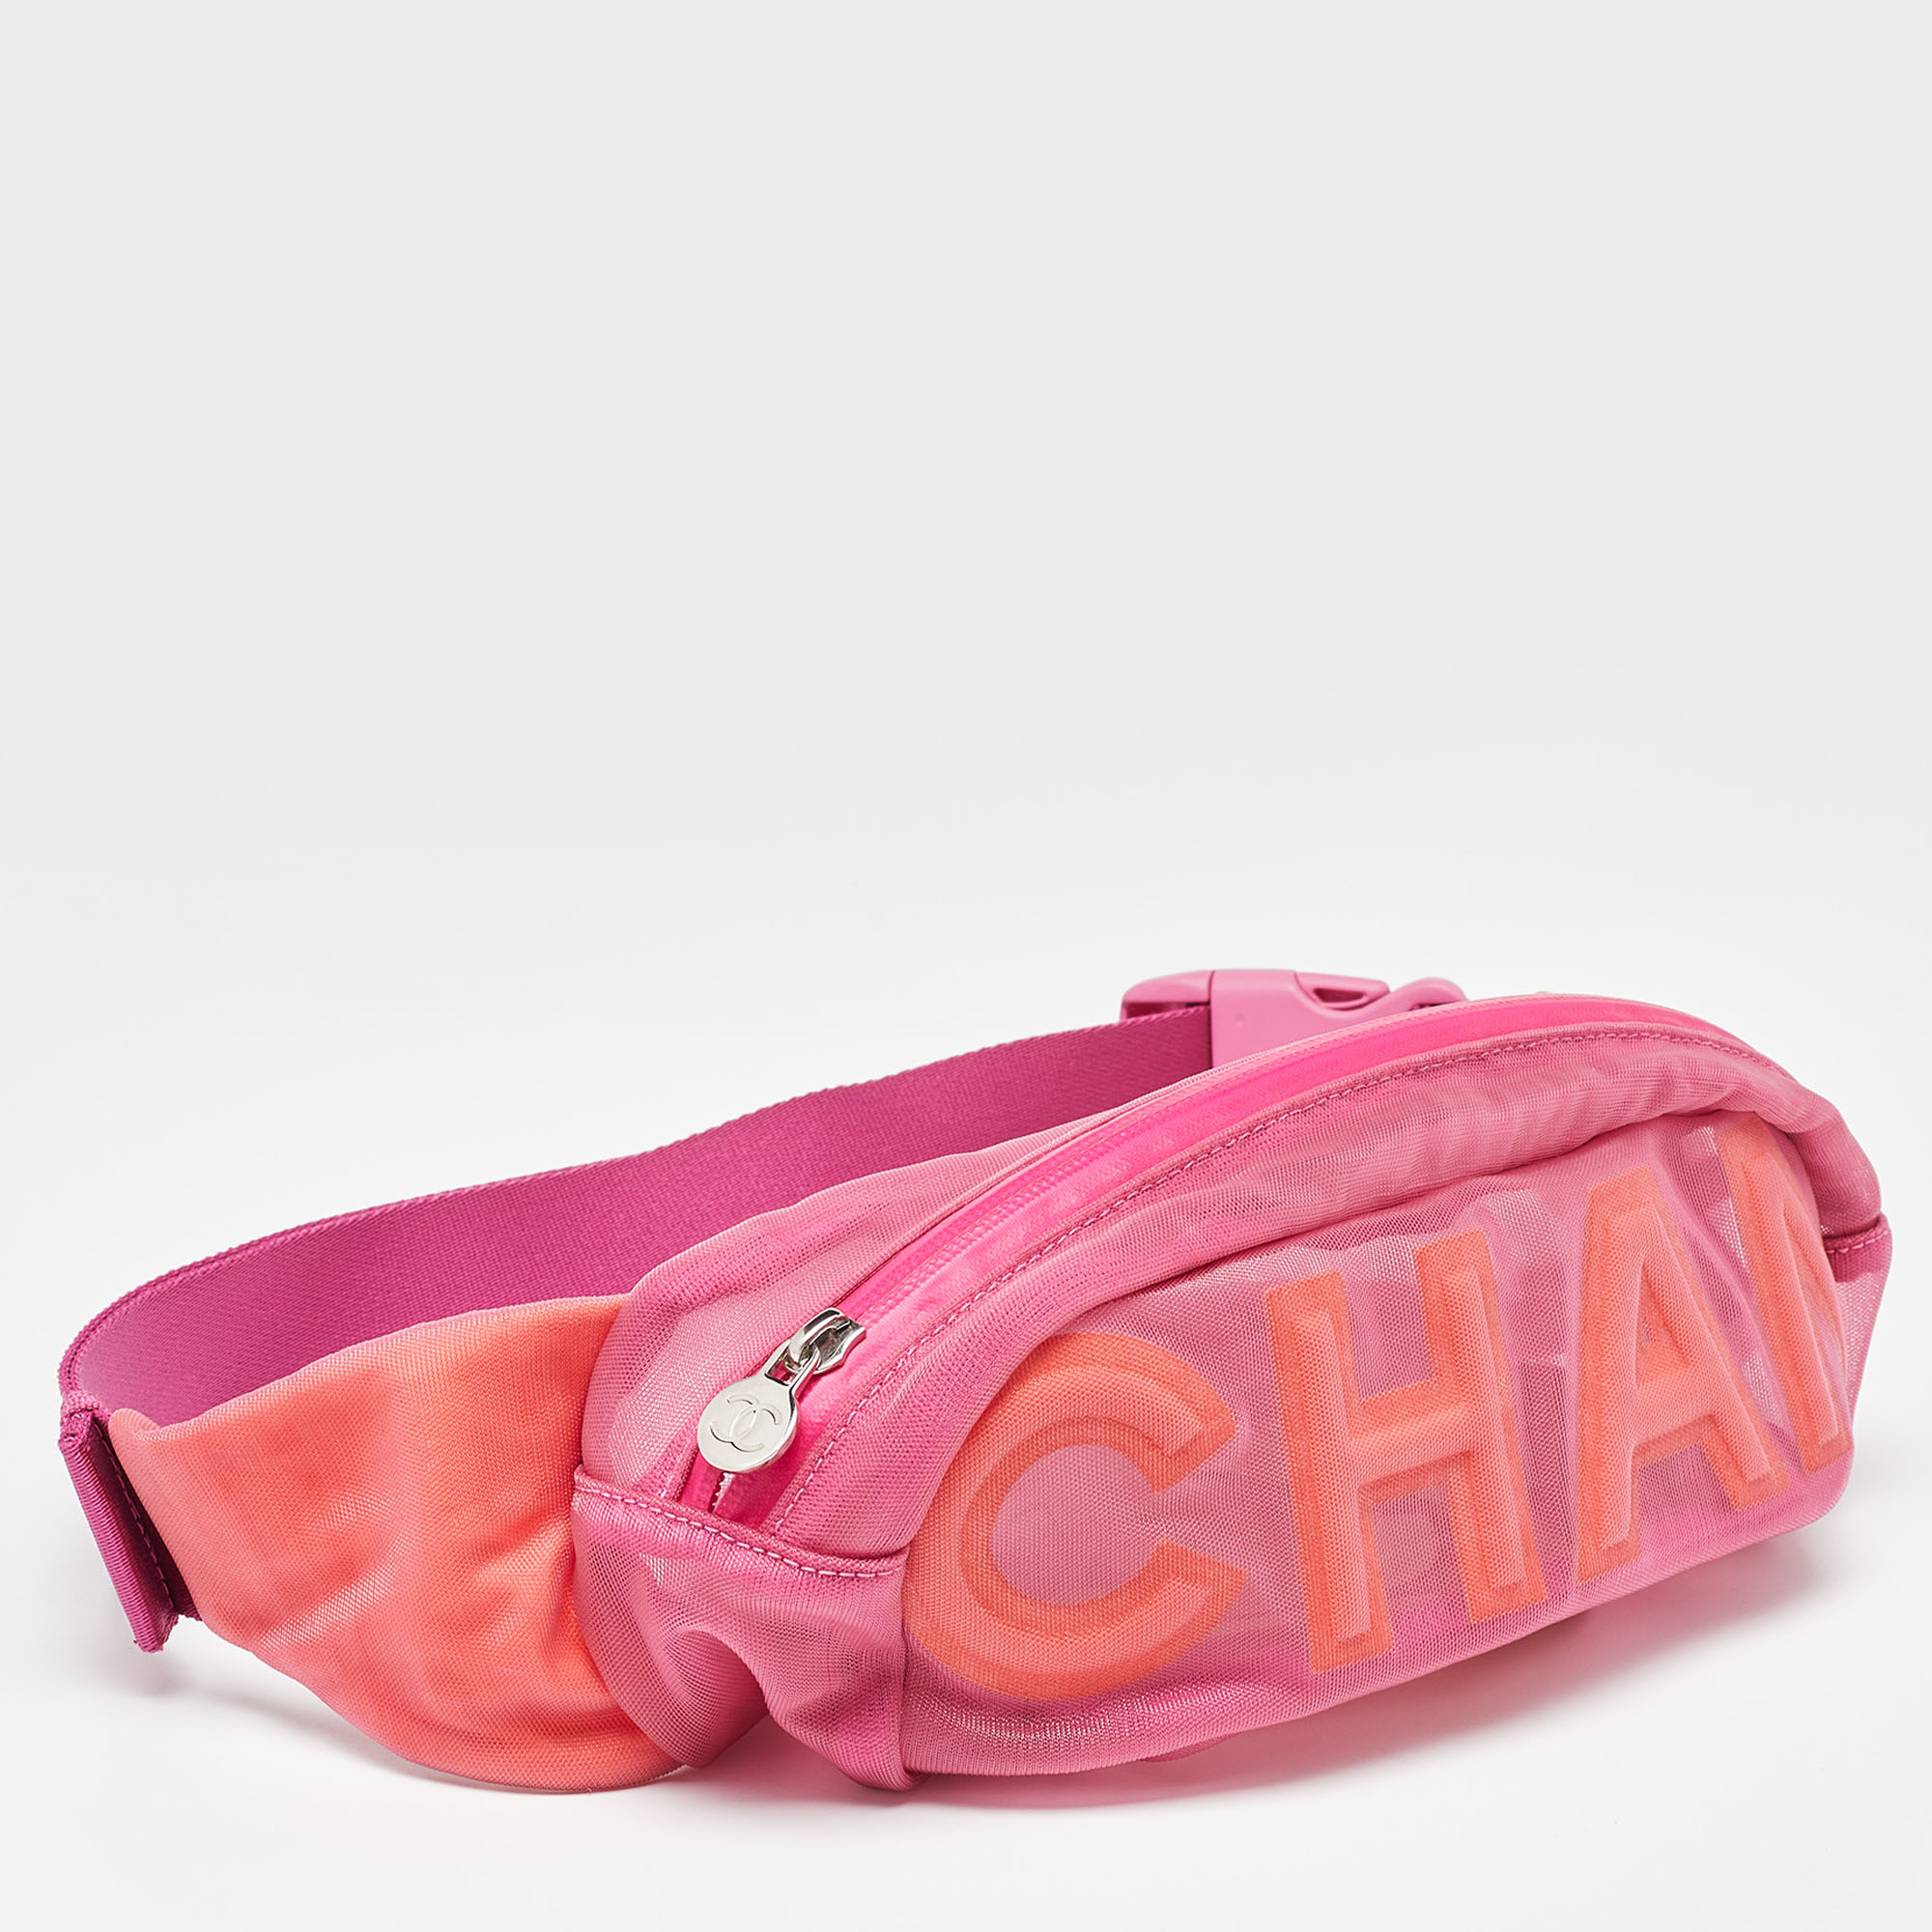 Chanel Pink Mesh And Fabric CC Belt Bag